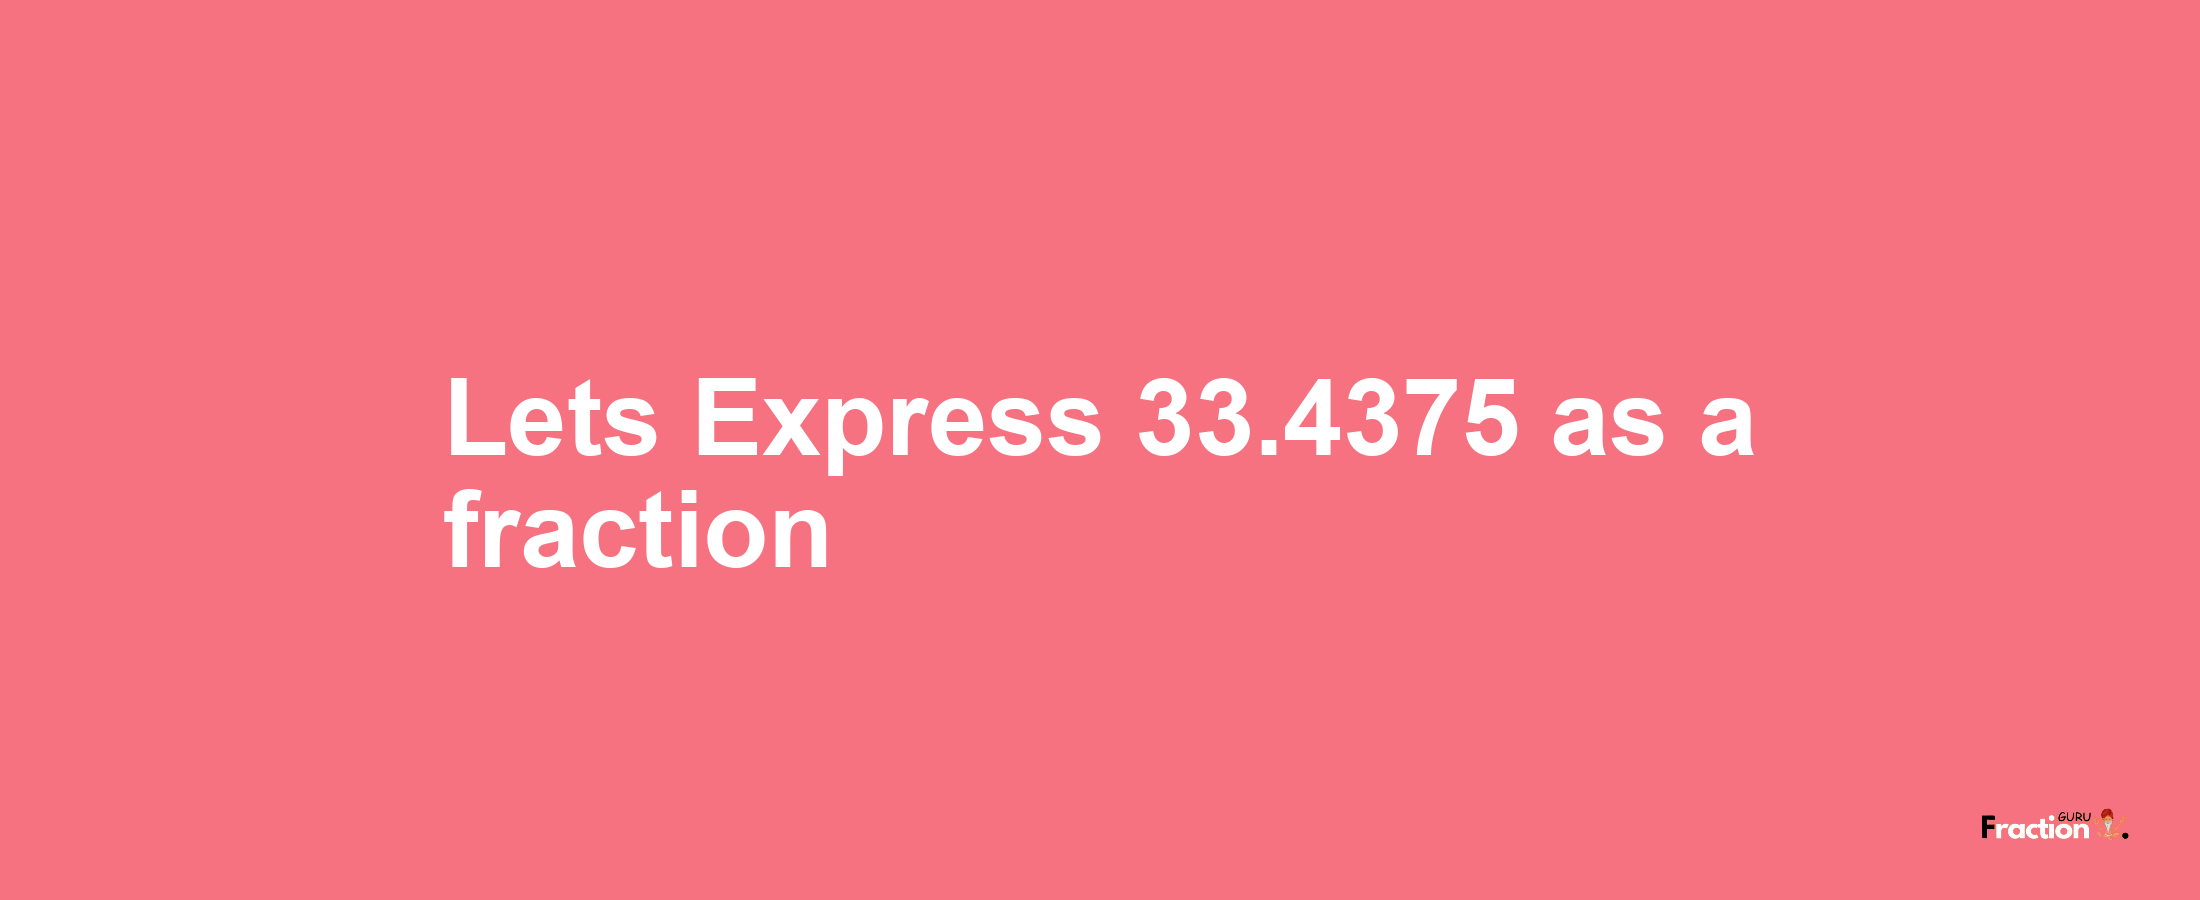 Lets Express 33.4375 as afraction